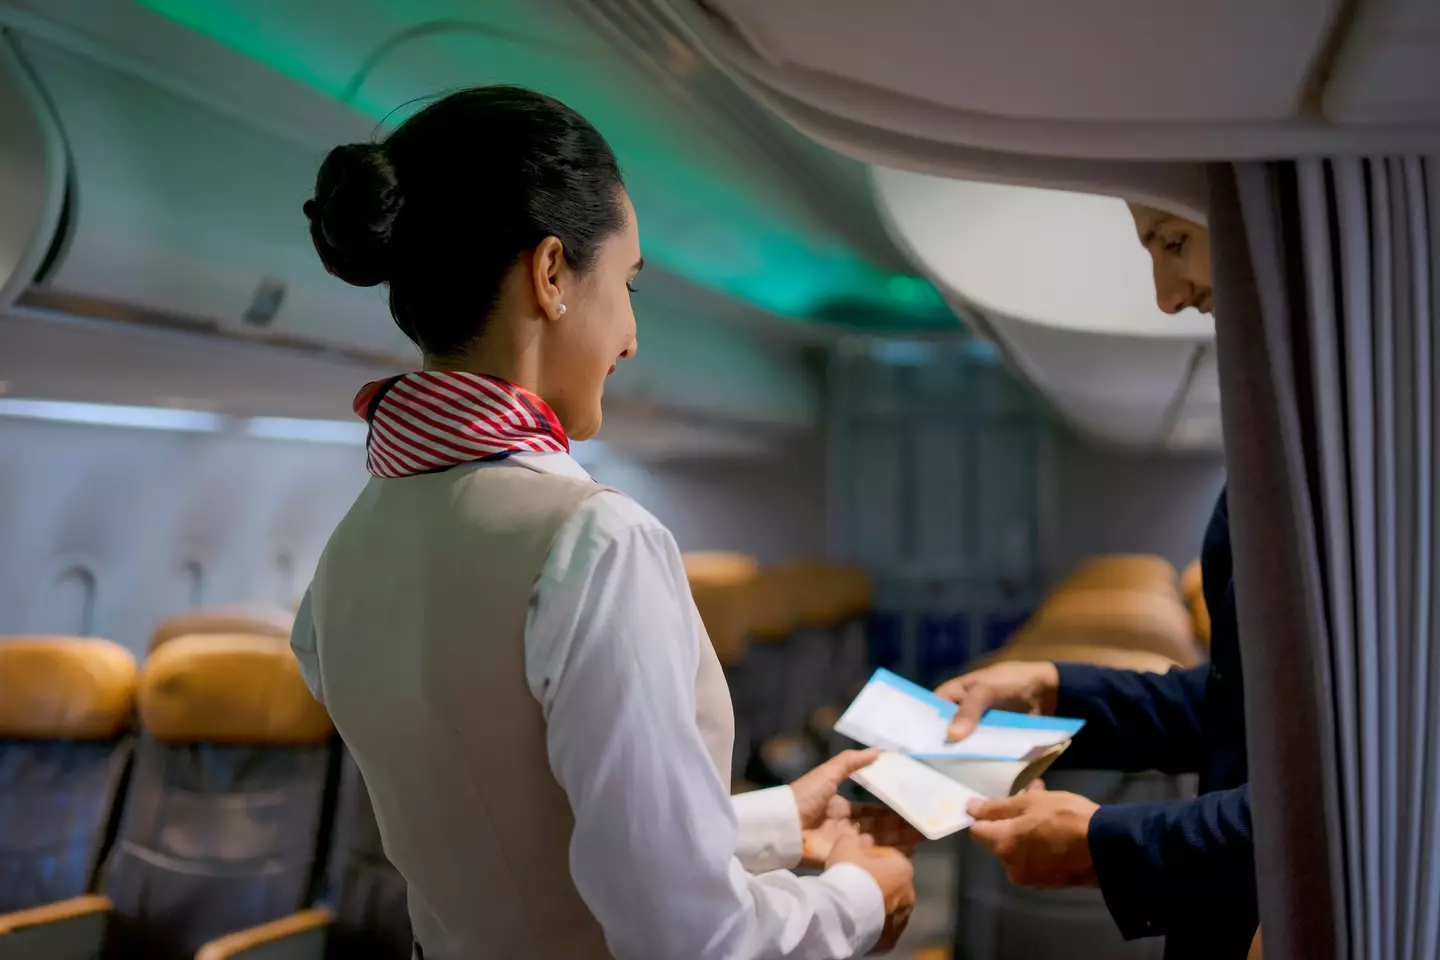 Flight attendants are said to come up with a secret language to communicate covertly with.